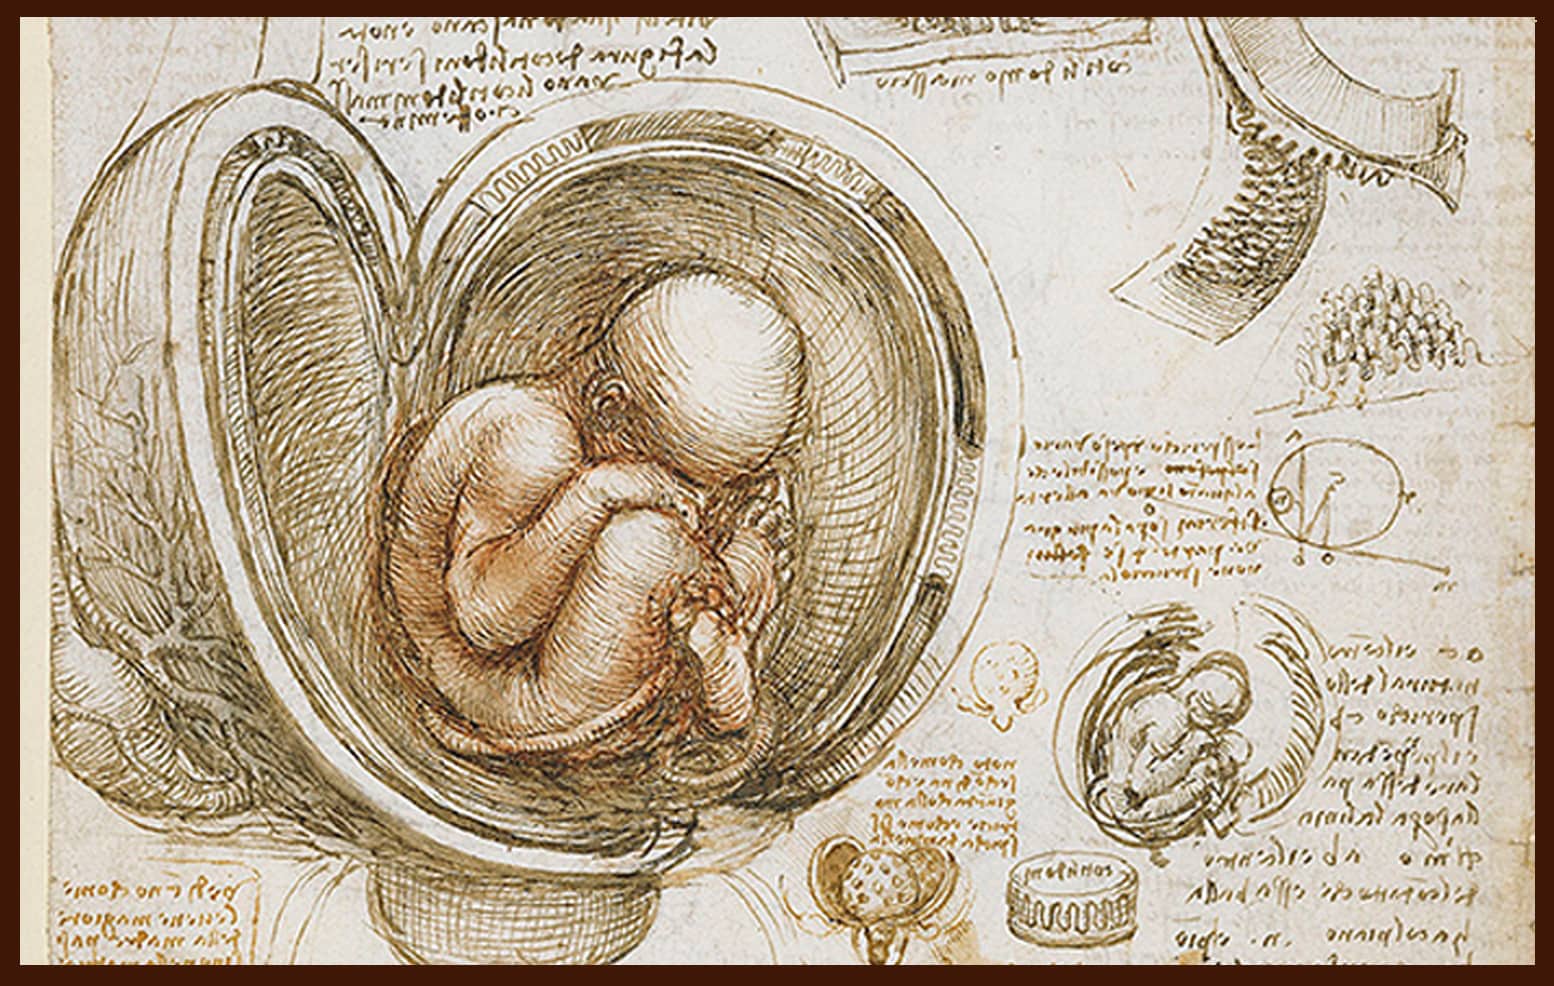 Studies of a Fetus in the Womb